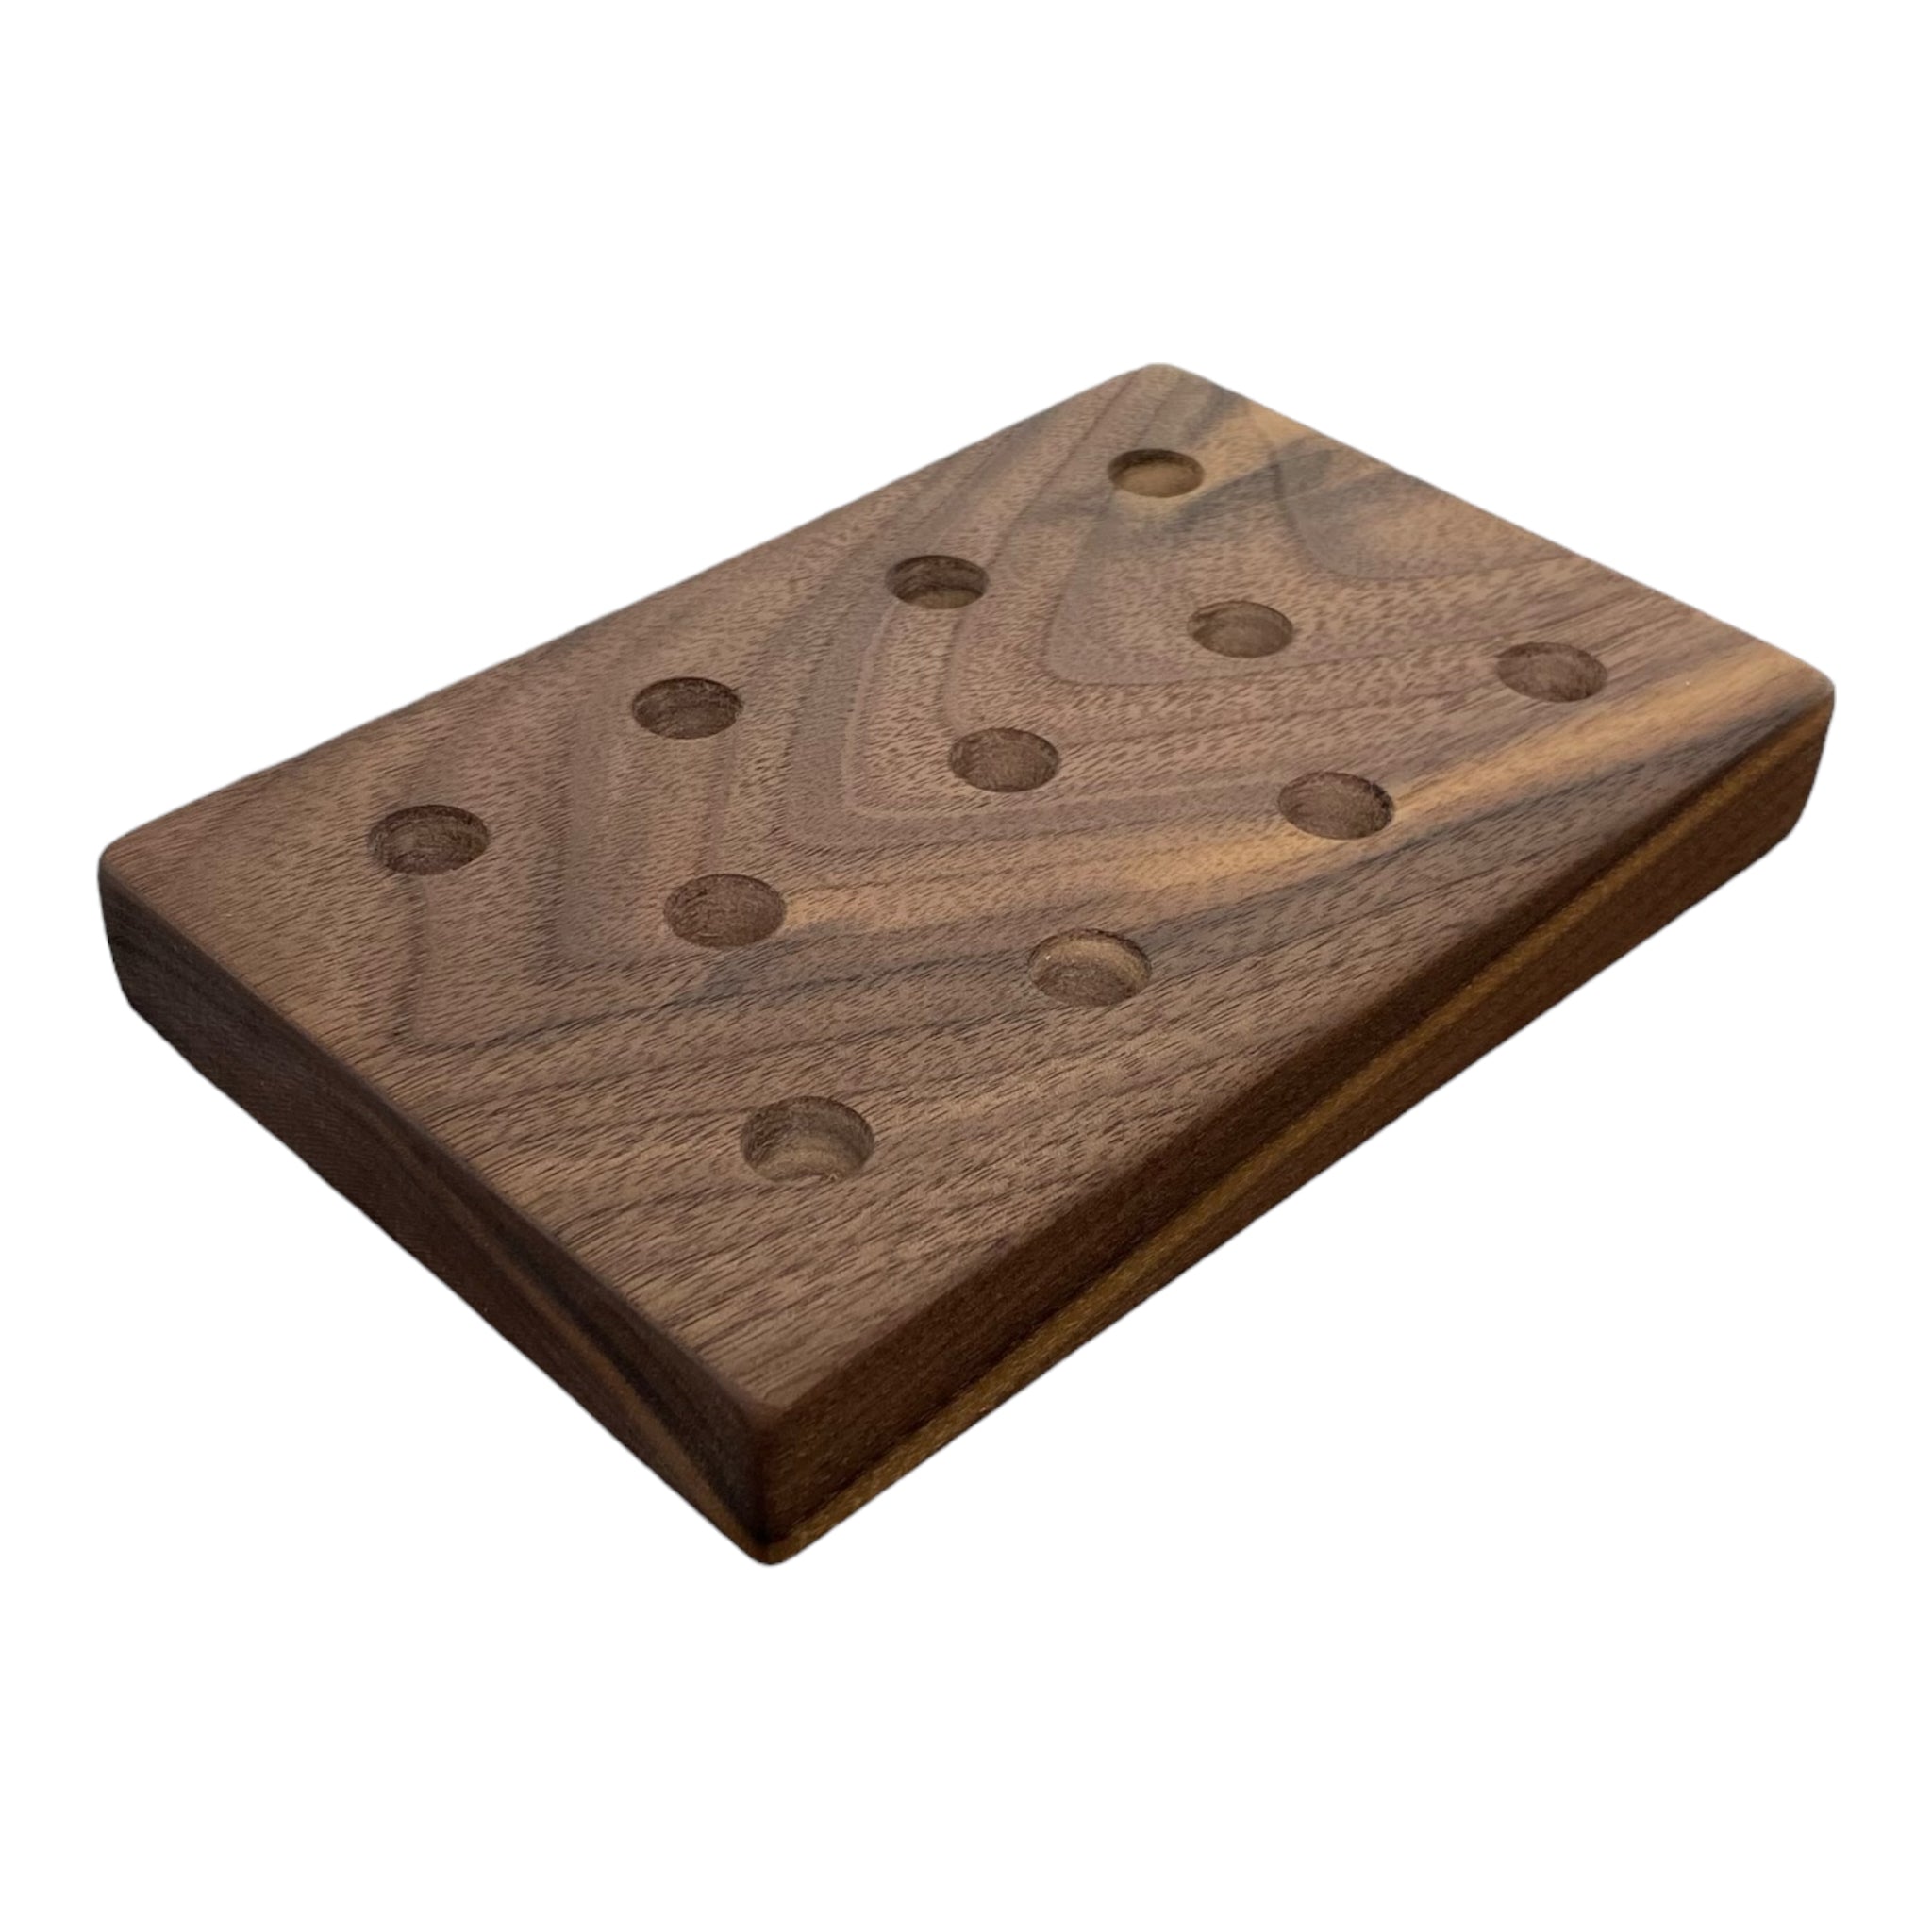 11 Hole Wood Display Stand Holder For 14mm Bong Bowl Pieces Or Quartz Bangers - Black Walnut